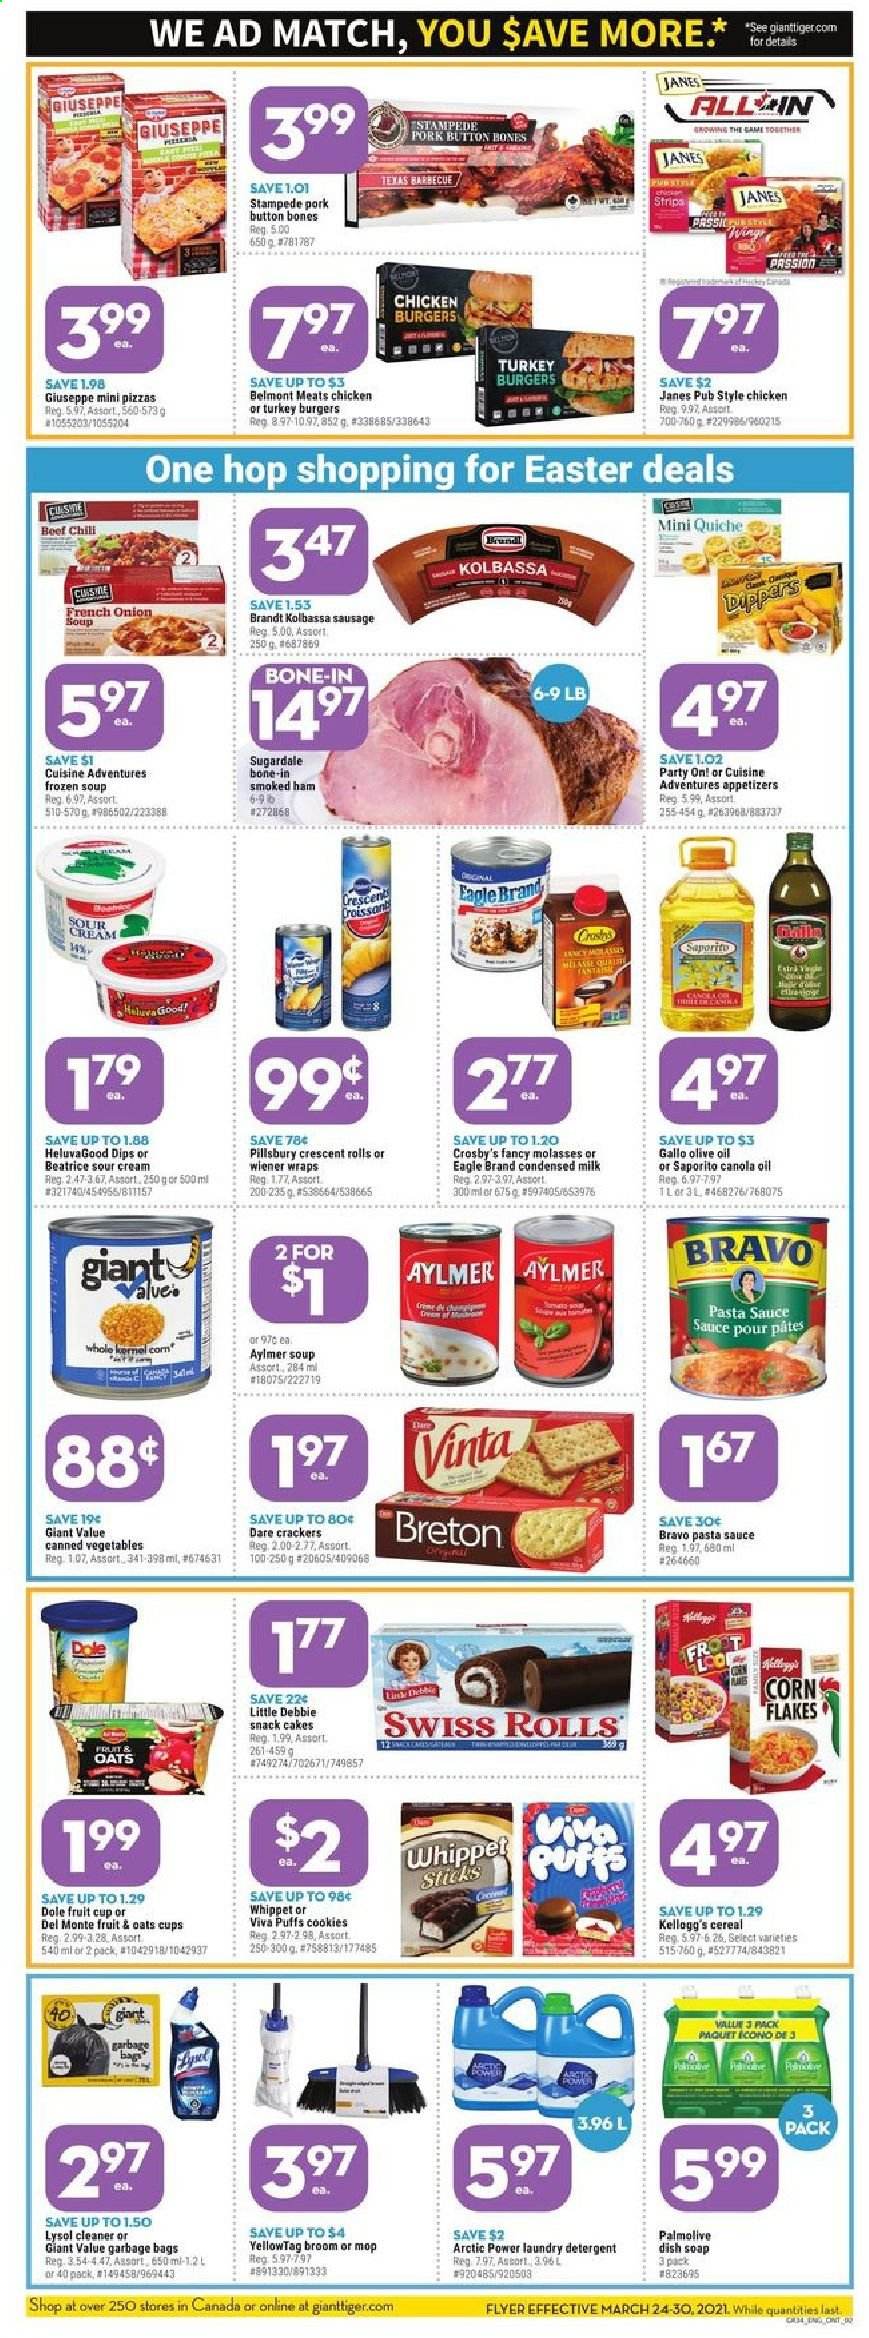 thumbnail - Giant Tiger Flyer - March 24, 2021 - March 30, 2021 - Sales products - cake, wraps, crescent rolls, puffs, corn, Dole, pizza, pasta sauce, onion soup, soup, hamburger, sauce, Pillsbury, Sugardale, ham, smoked ham, sausage, milk, condensed milk, sour cream, strips, quiche, snack, crackers, canned vegetables, cereals, canola oil, olive oil, molasses, turkey burger, cleaner, Lysol, laundry detergent, Palmolive, soap, mop, broom. Page 2.